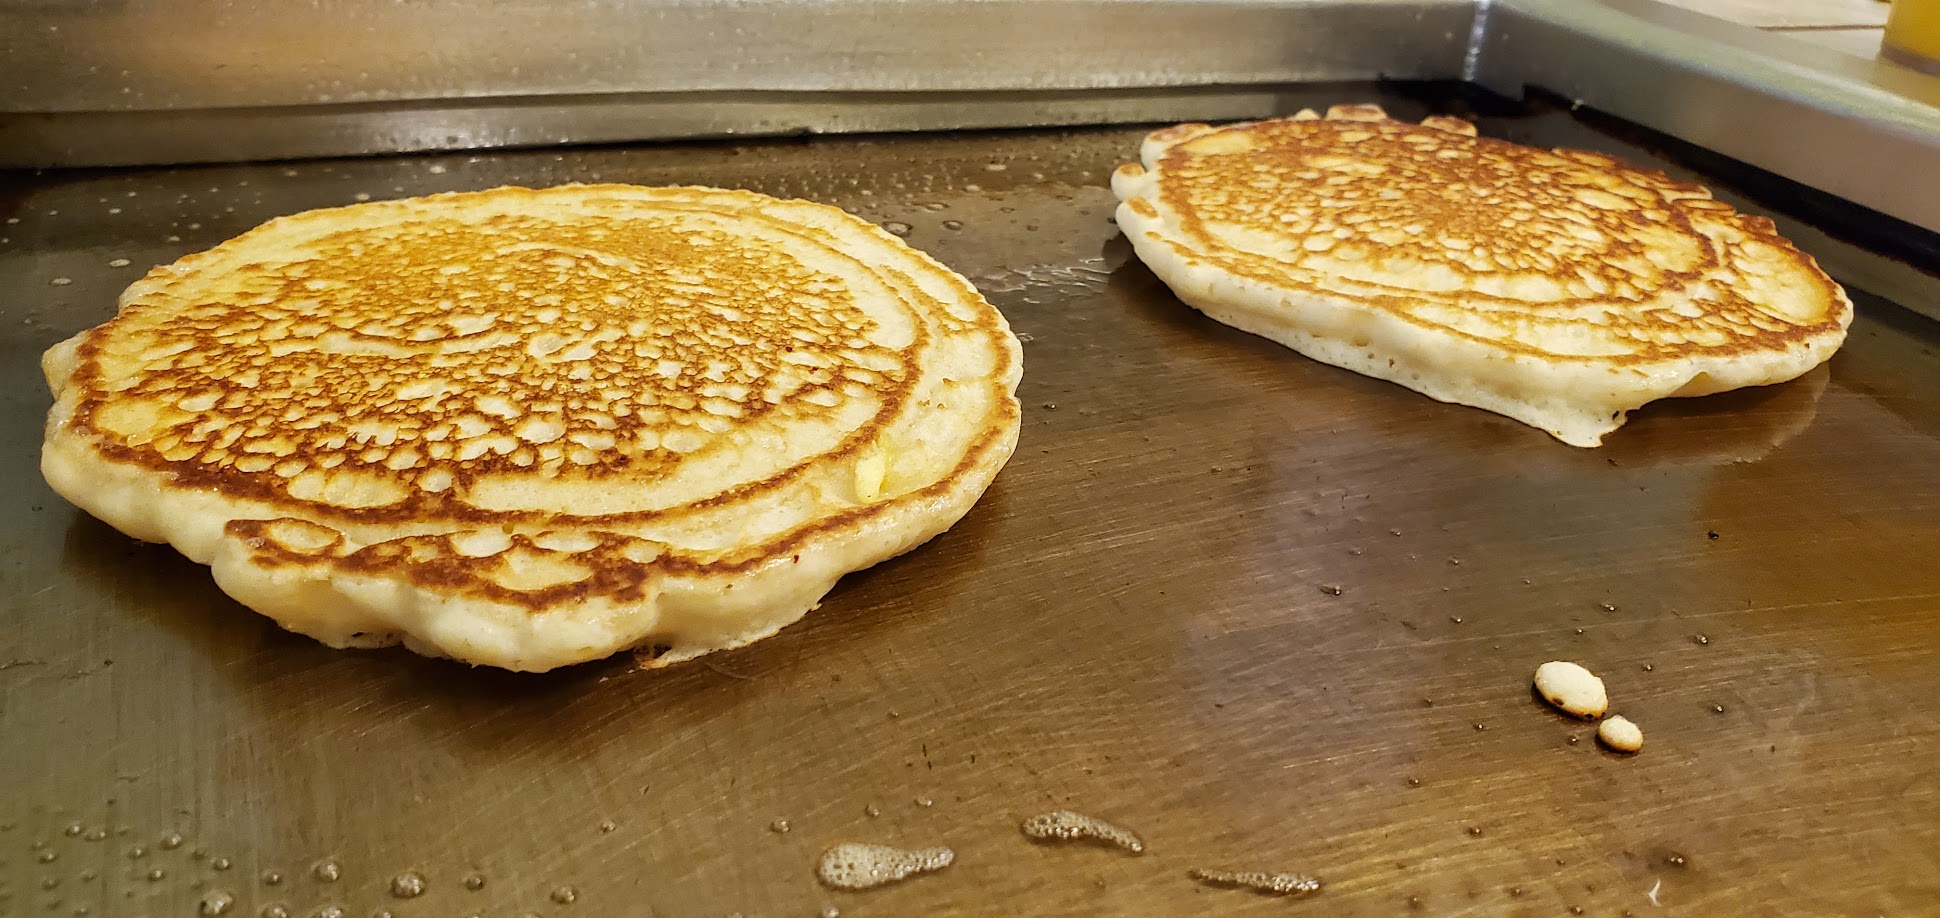 The Pfunky Griddle